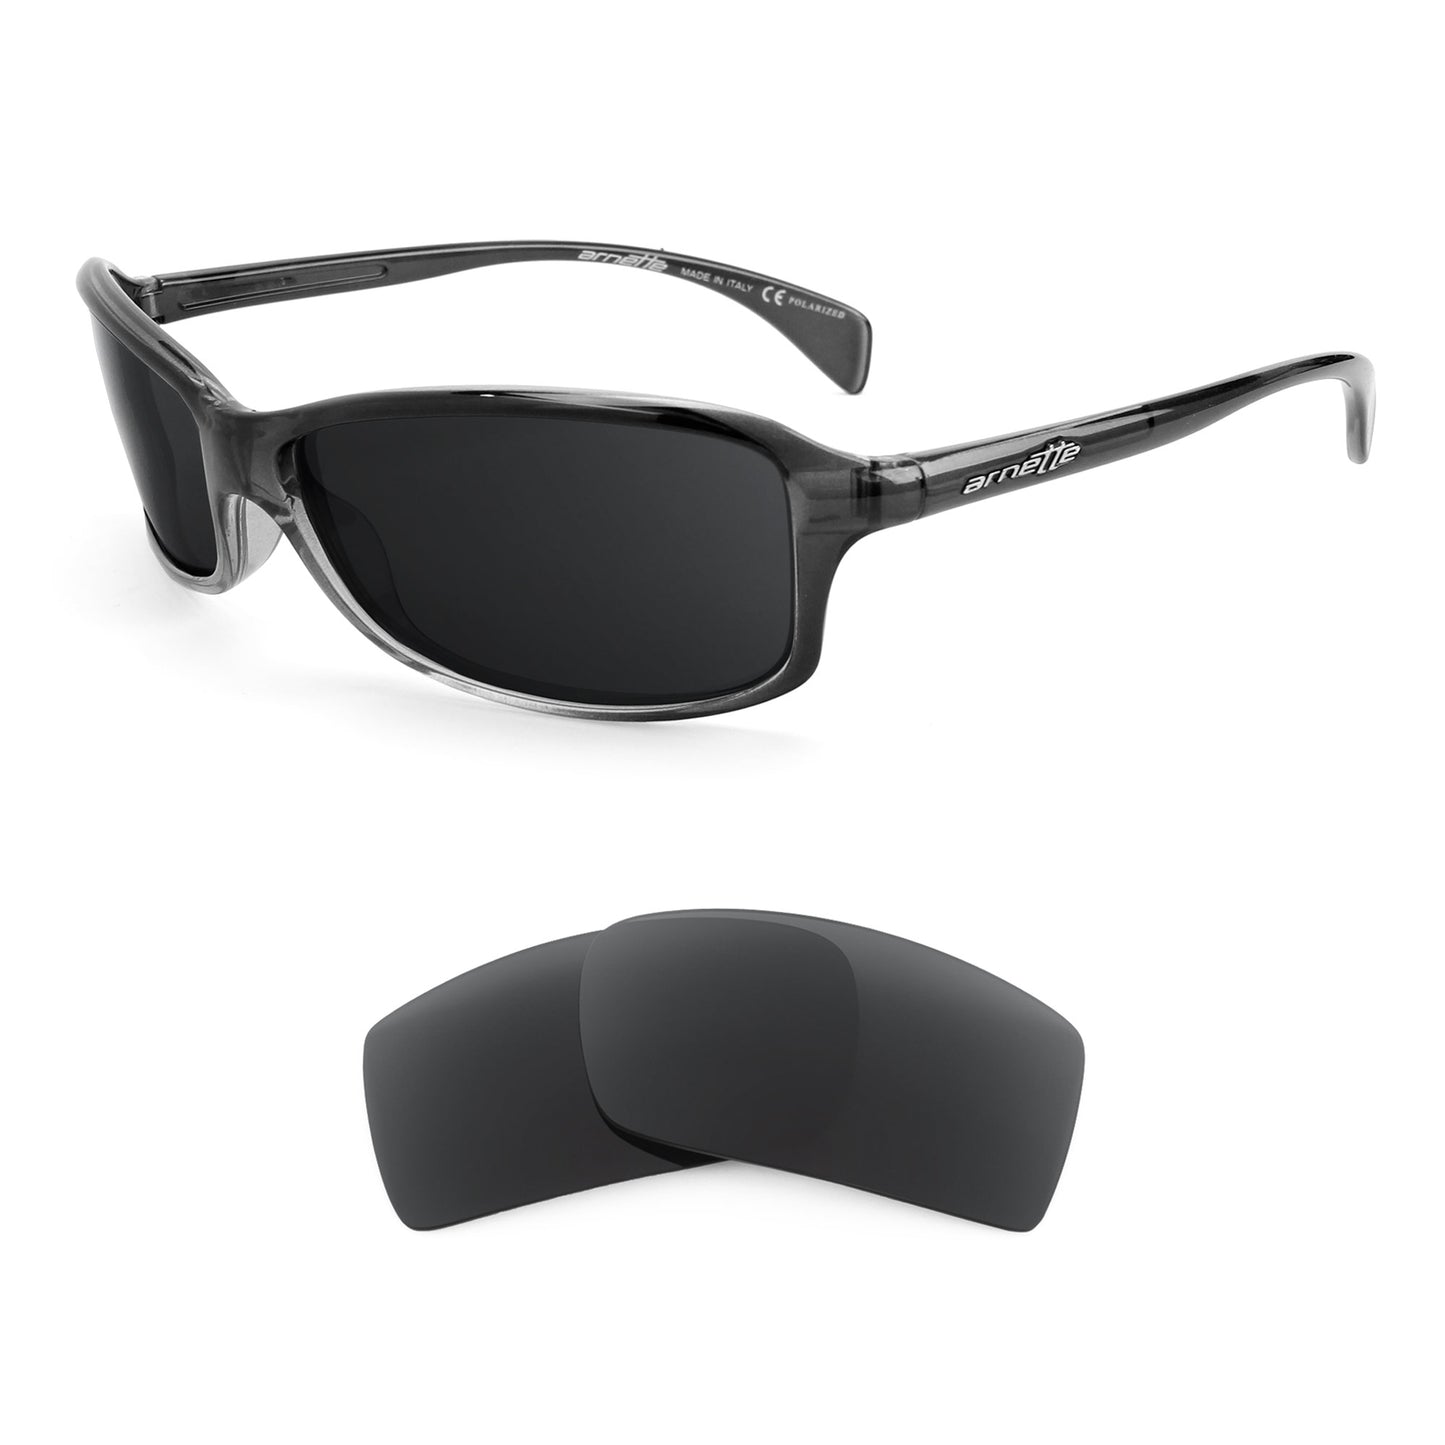 Arnette AN4067 sunglasses with replacement lenses